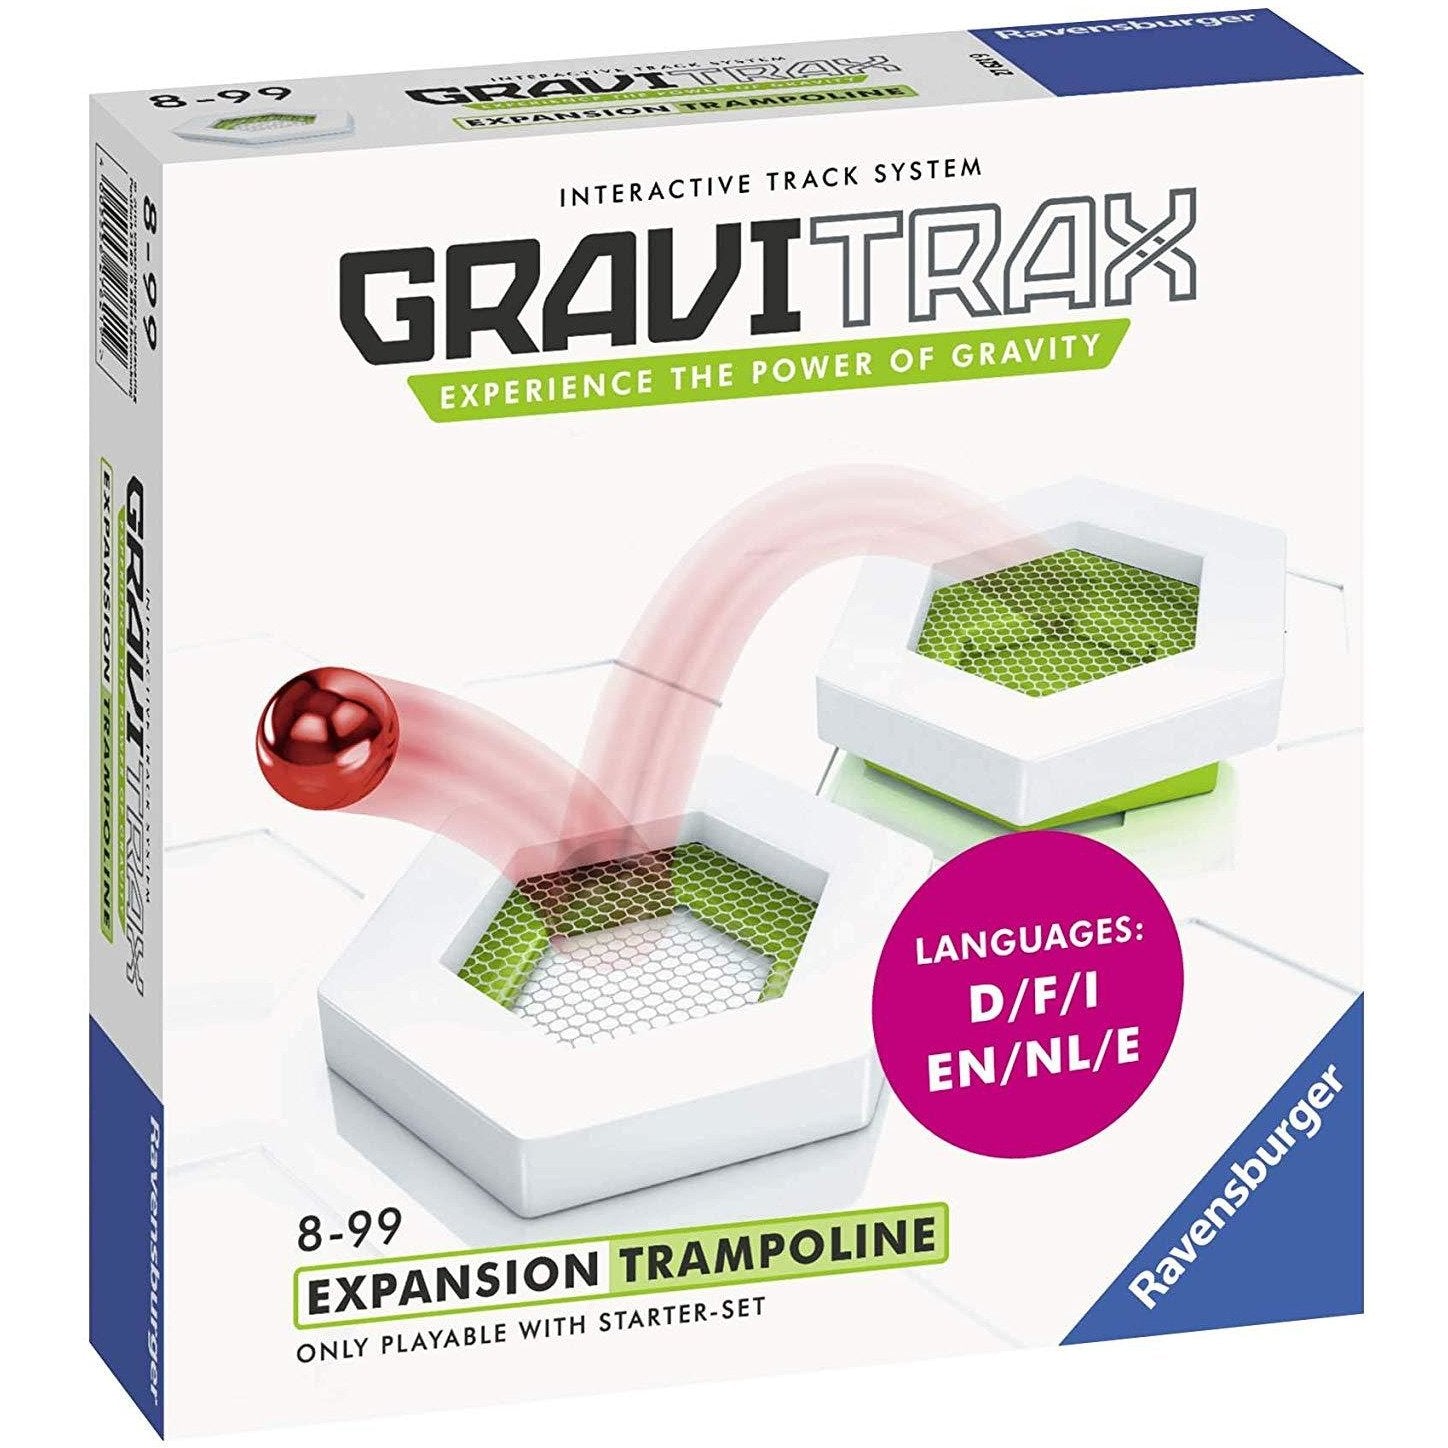 Race to the finish  GraviTrax Starter Set Race is specially